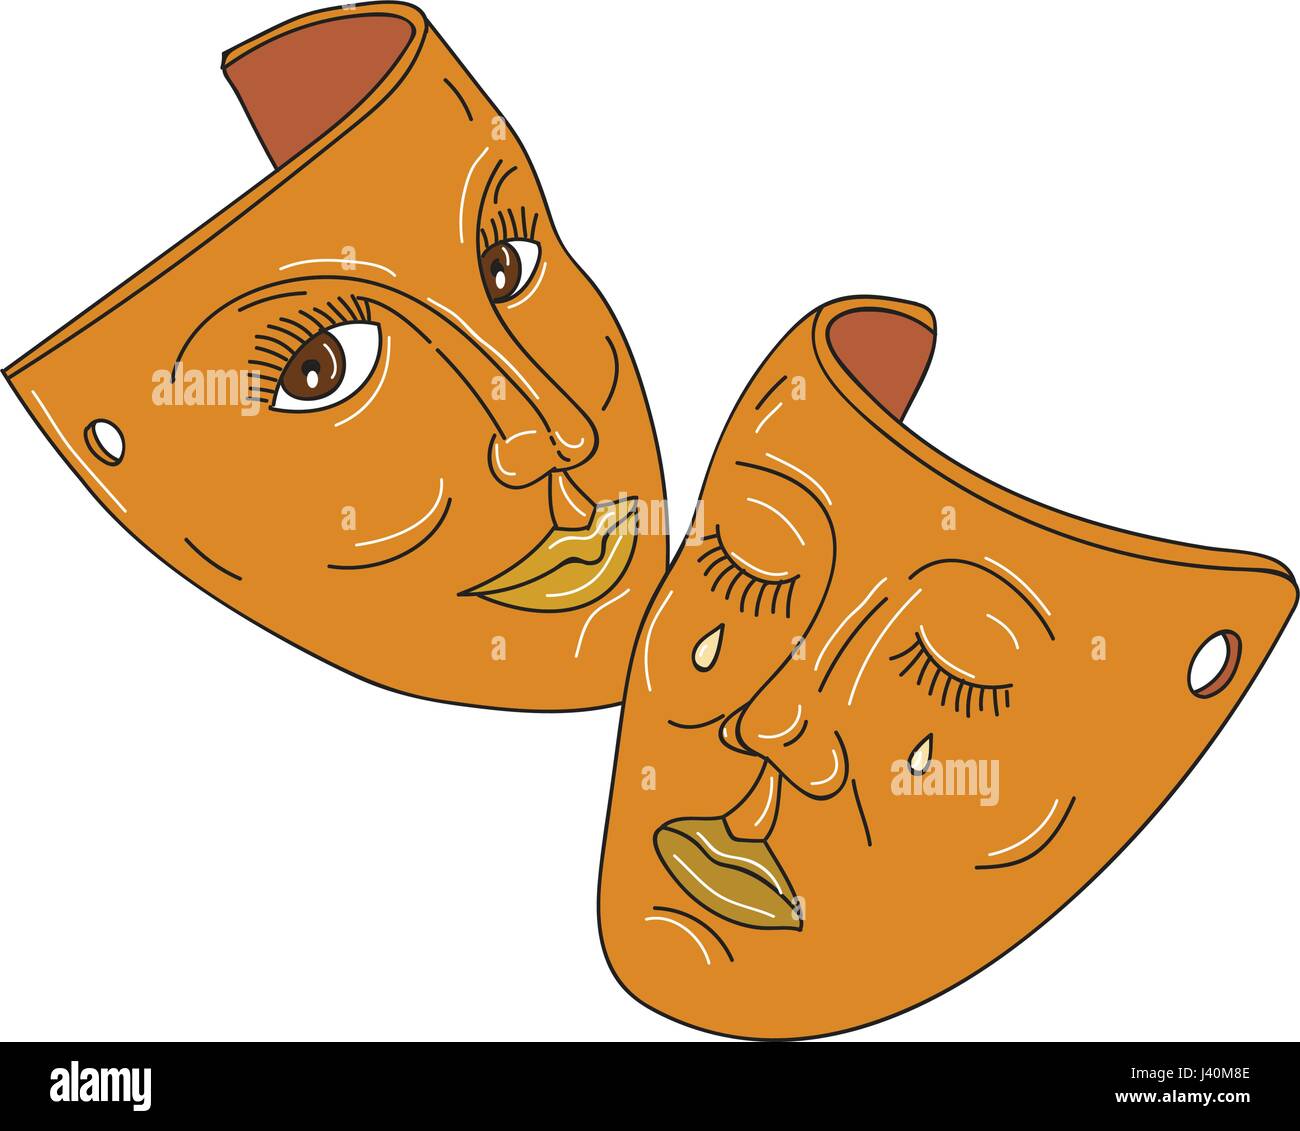 Mono line style illustration showing the two masks associated with drama representing the traditional generic division between comedy and tragedy usin Stock Vector